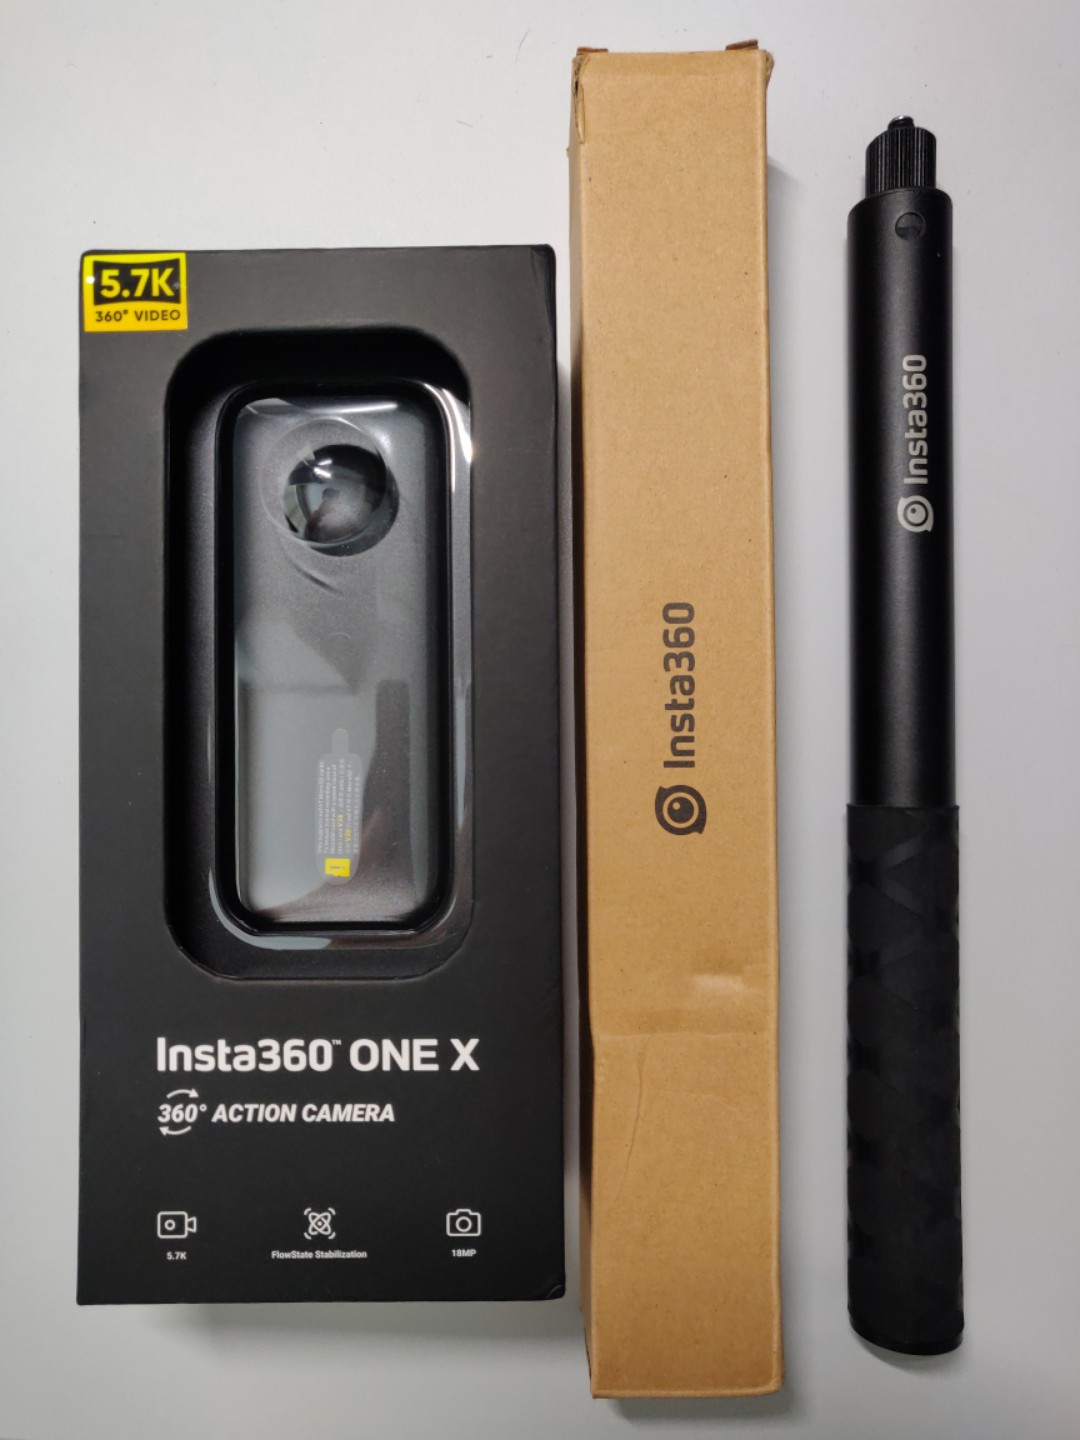 insta360_one_x_with_invisible_selfie_stick_1571557986_b1bcfb5e.jpg